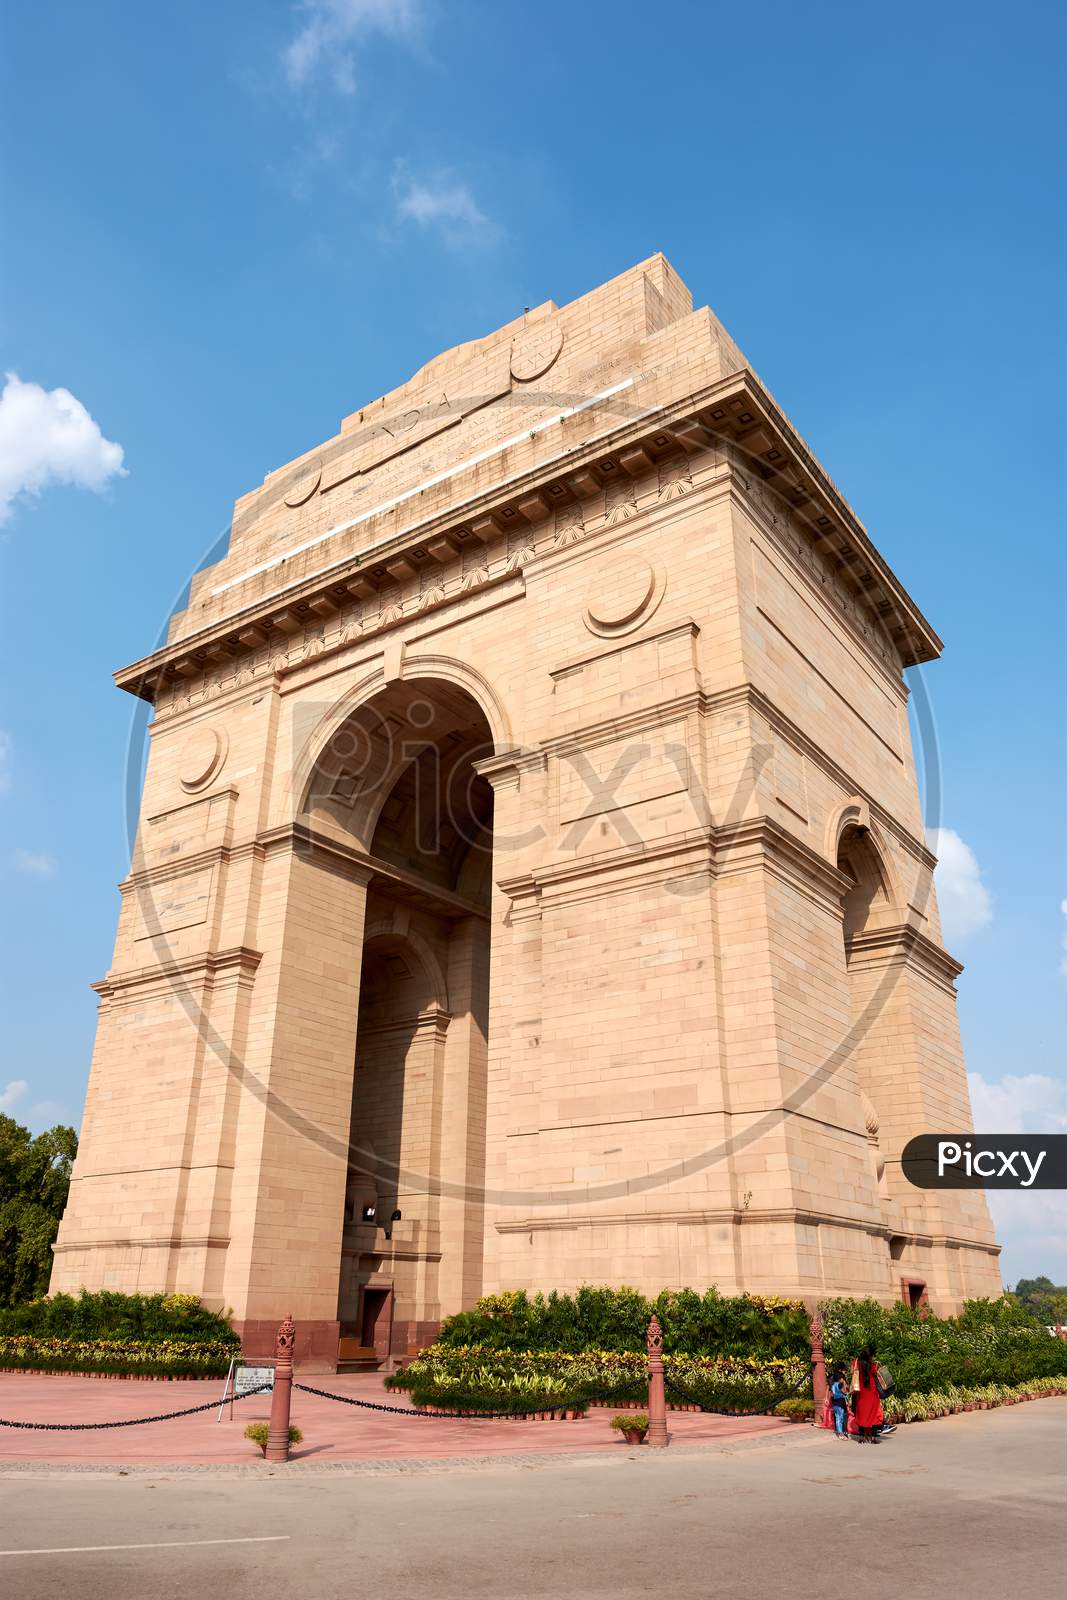 India Gate War Memorial In New Delhi, India, Dedicated To 70,000 Soldiers Of The British Indian Army Killed In Wars Between 1914 And 1921